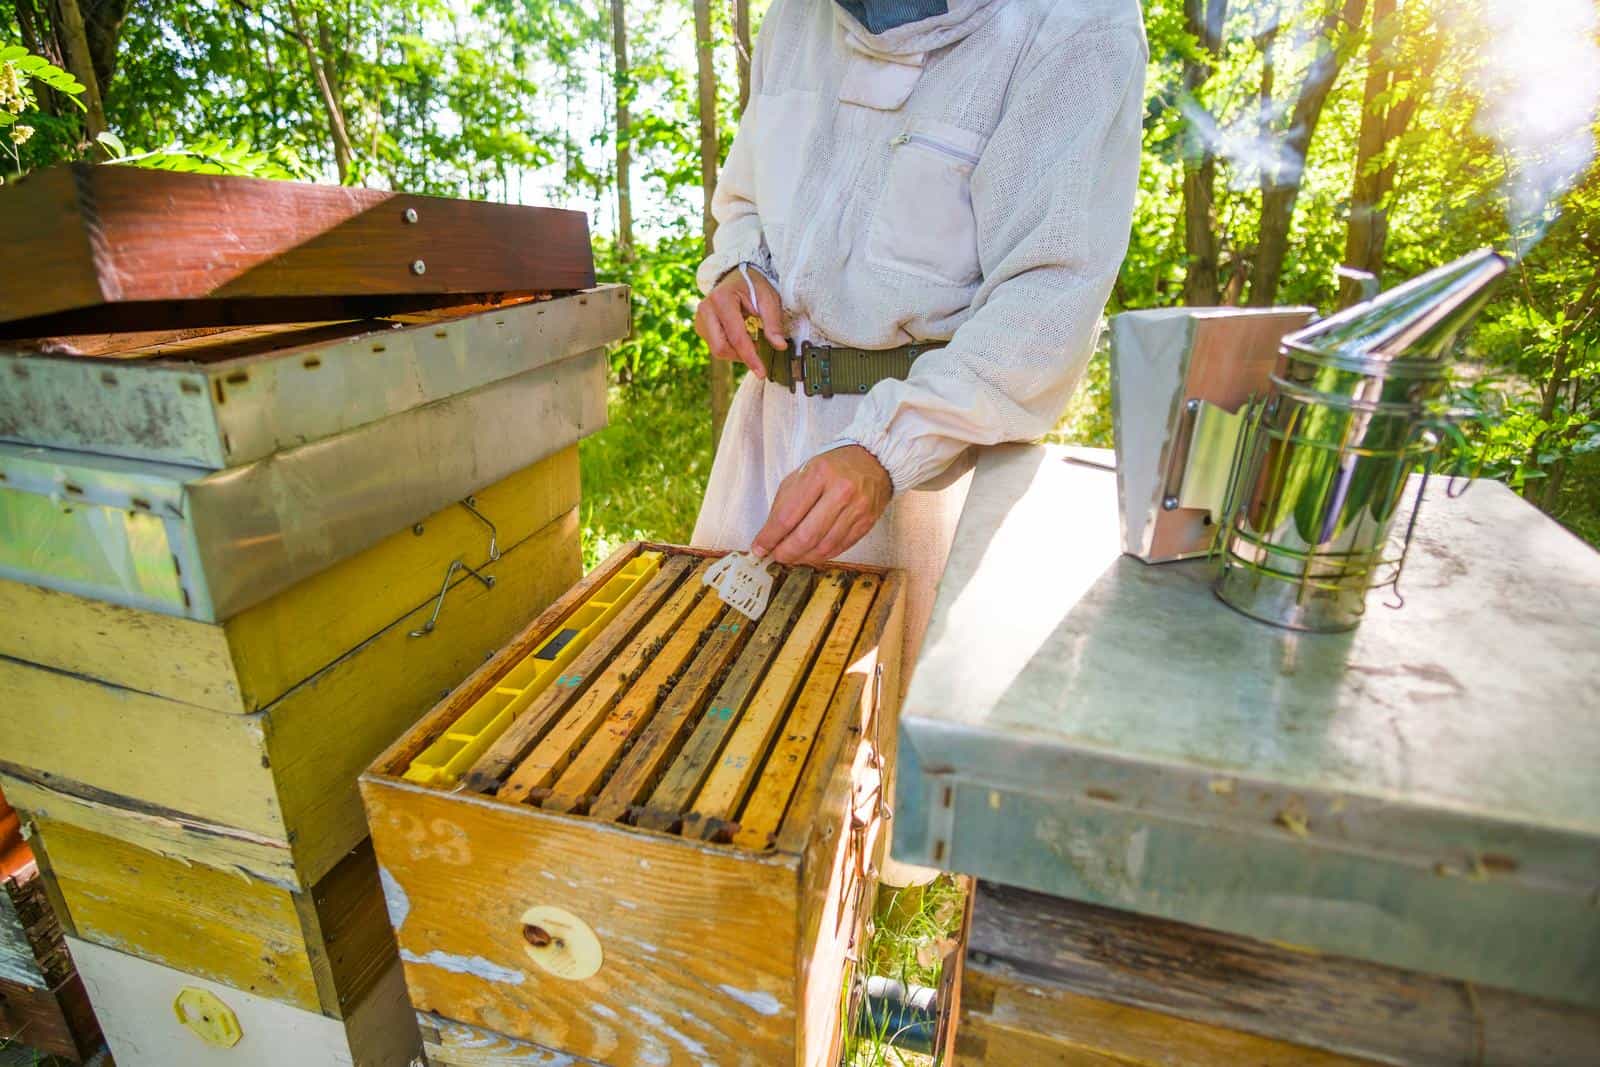 A shot of a man from above tending to his beehive with a smoker placed to the side.